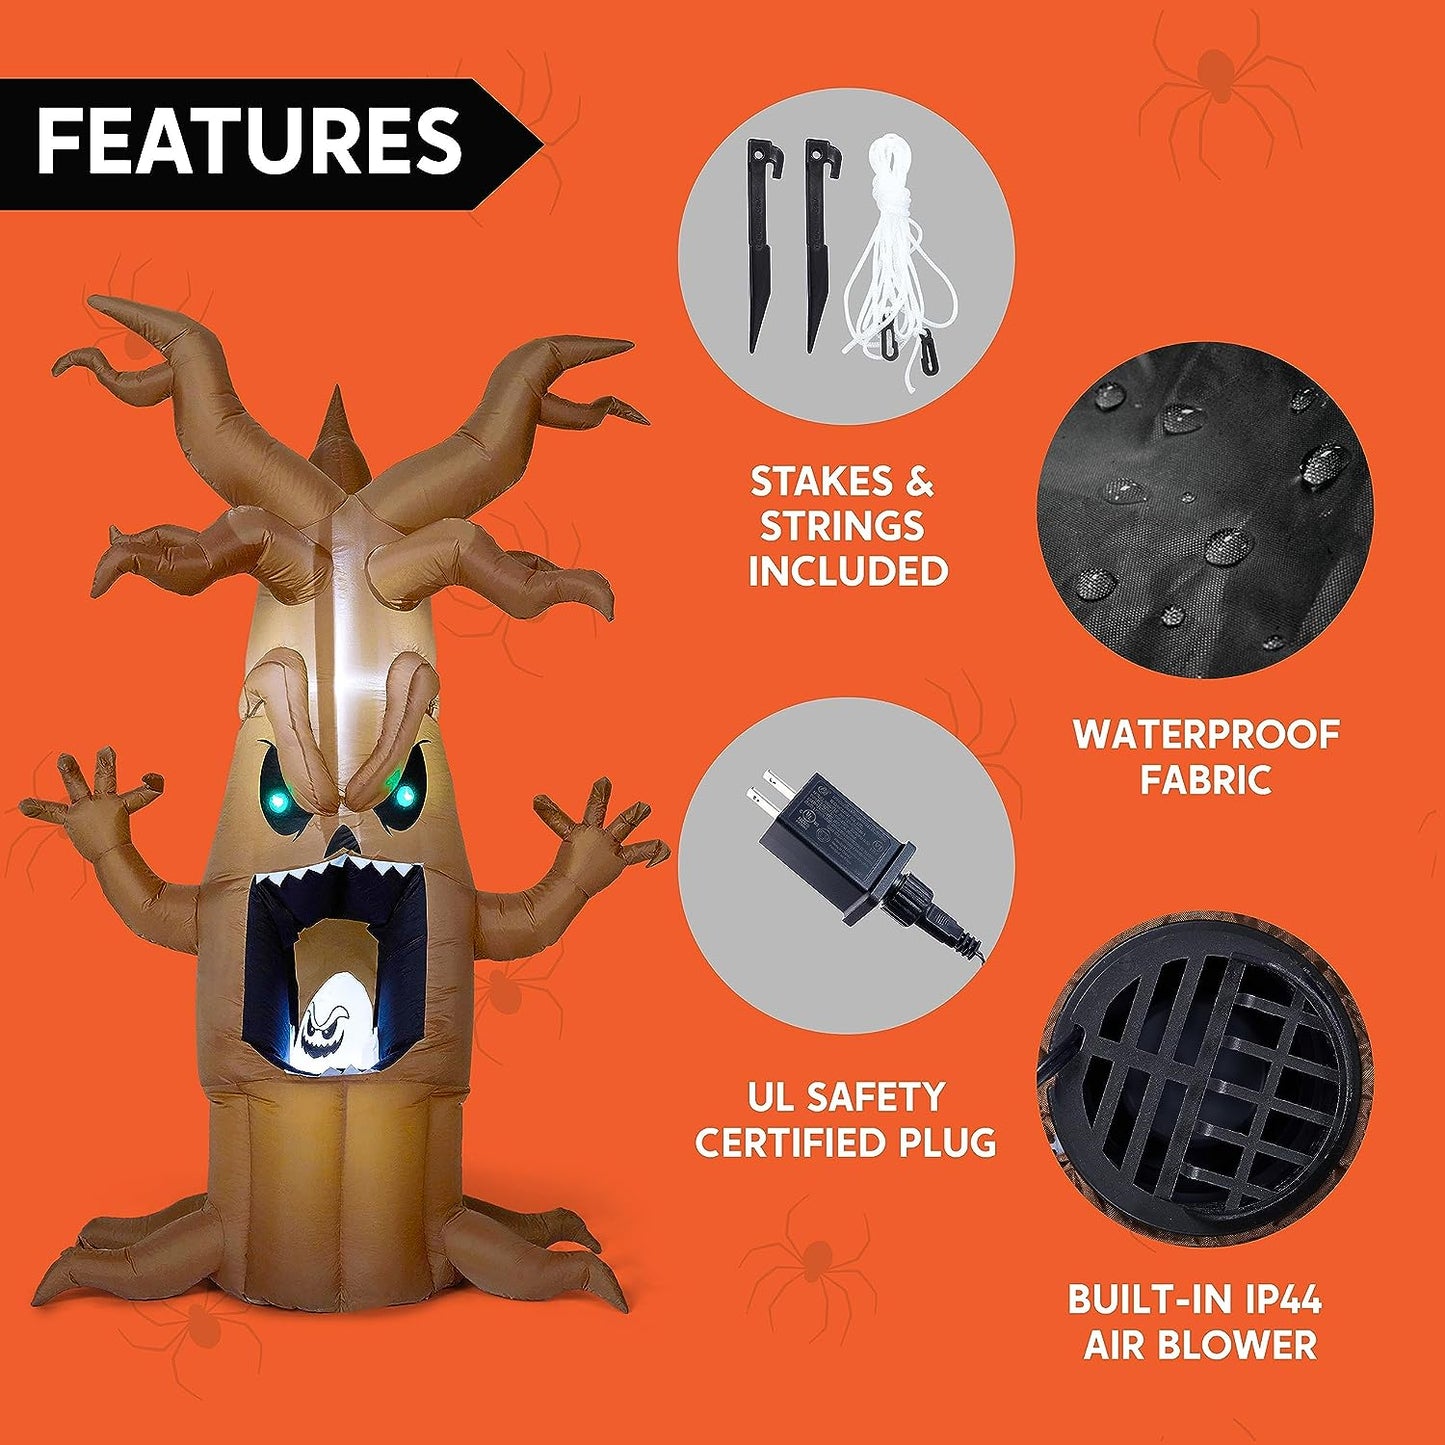 7ft LED Scary Tree with Animated Ghost Halloween Inflatable